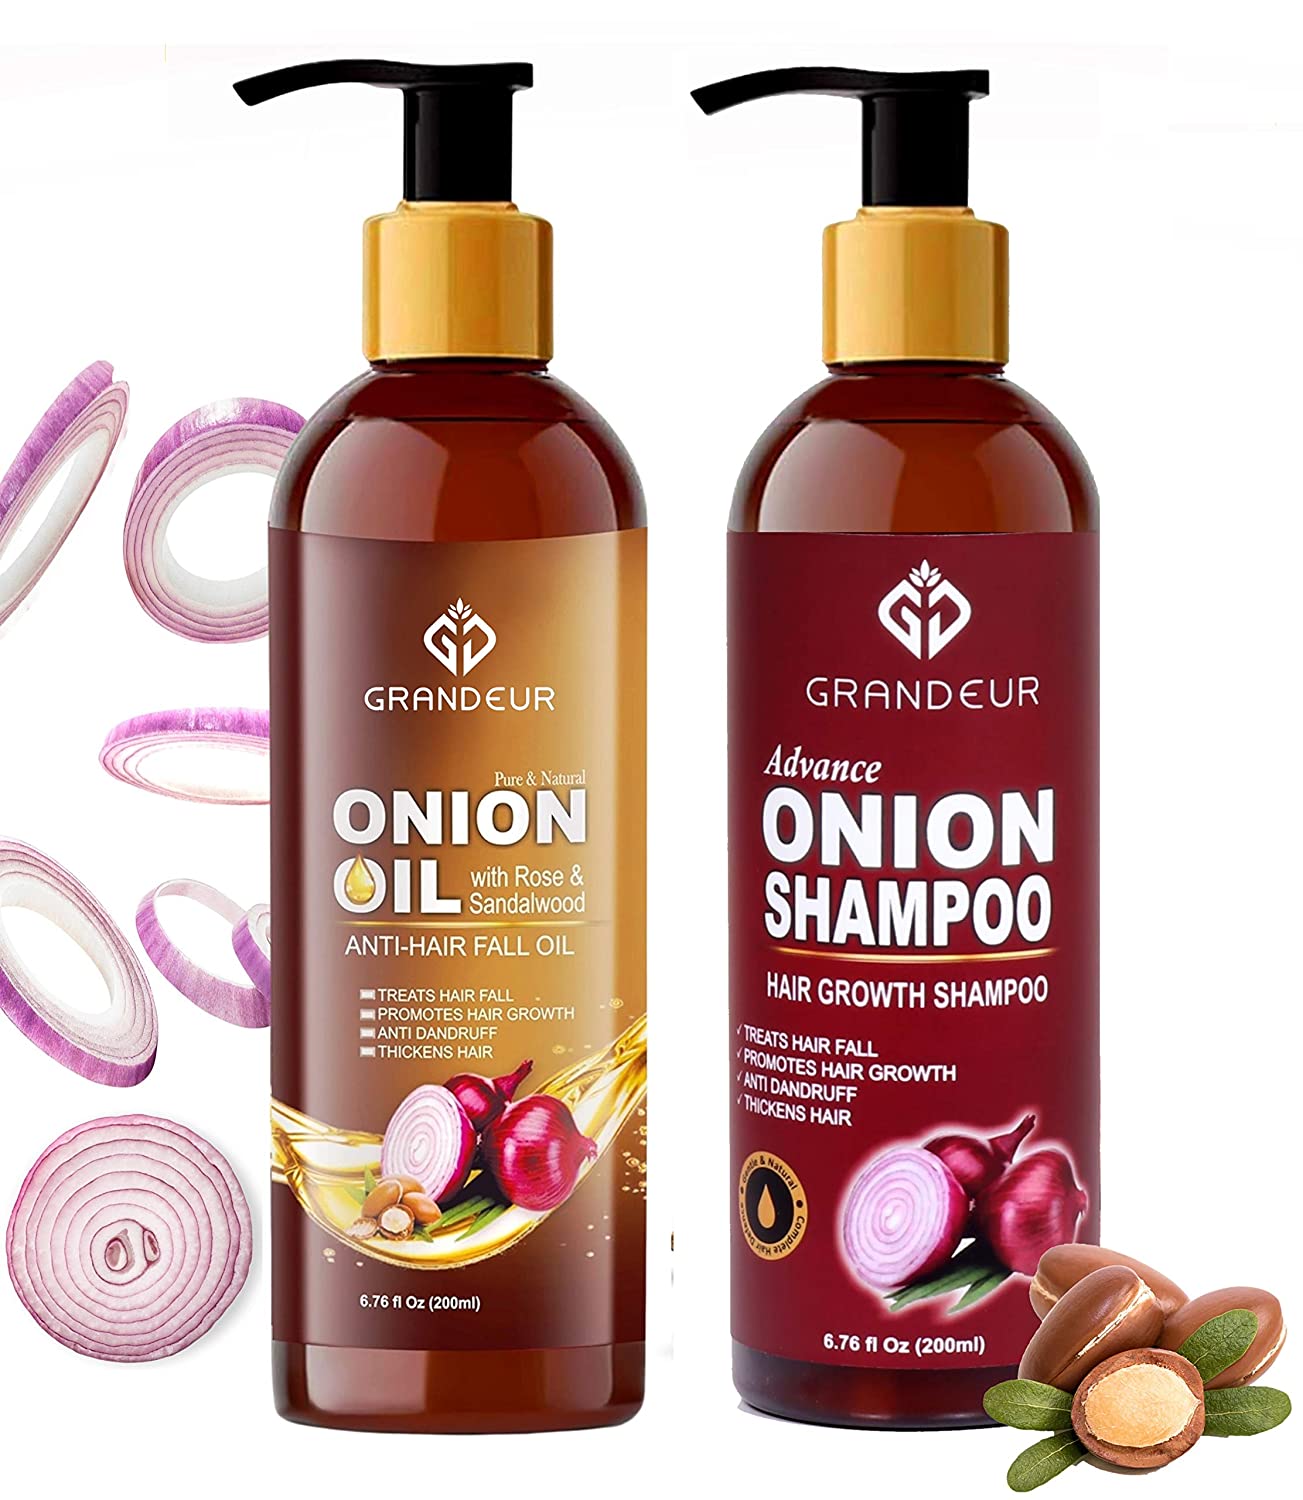 Grandeur Onion Oil for Hair And Onion Shampoo For Hair Growth With Red onion Extract And Essential Ingredients (200ml Each)